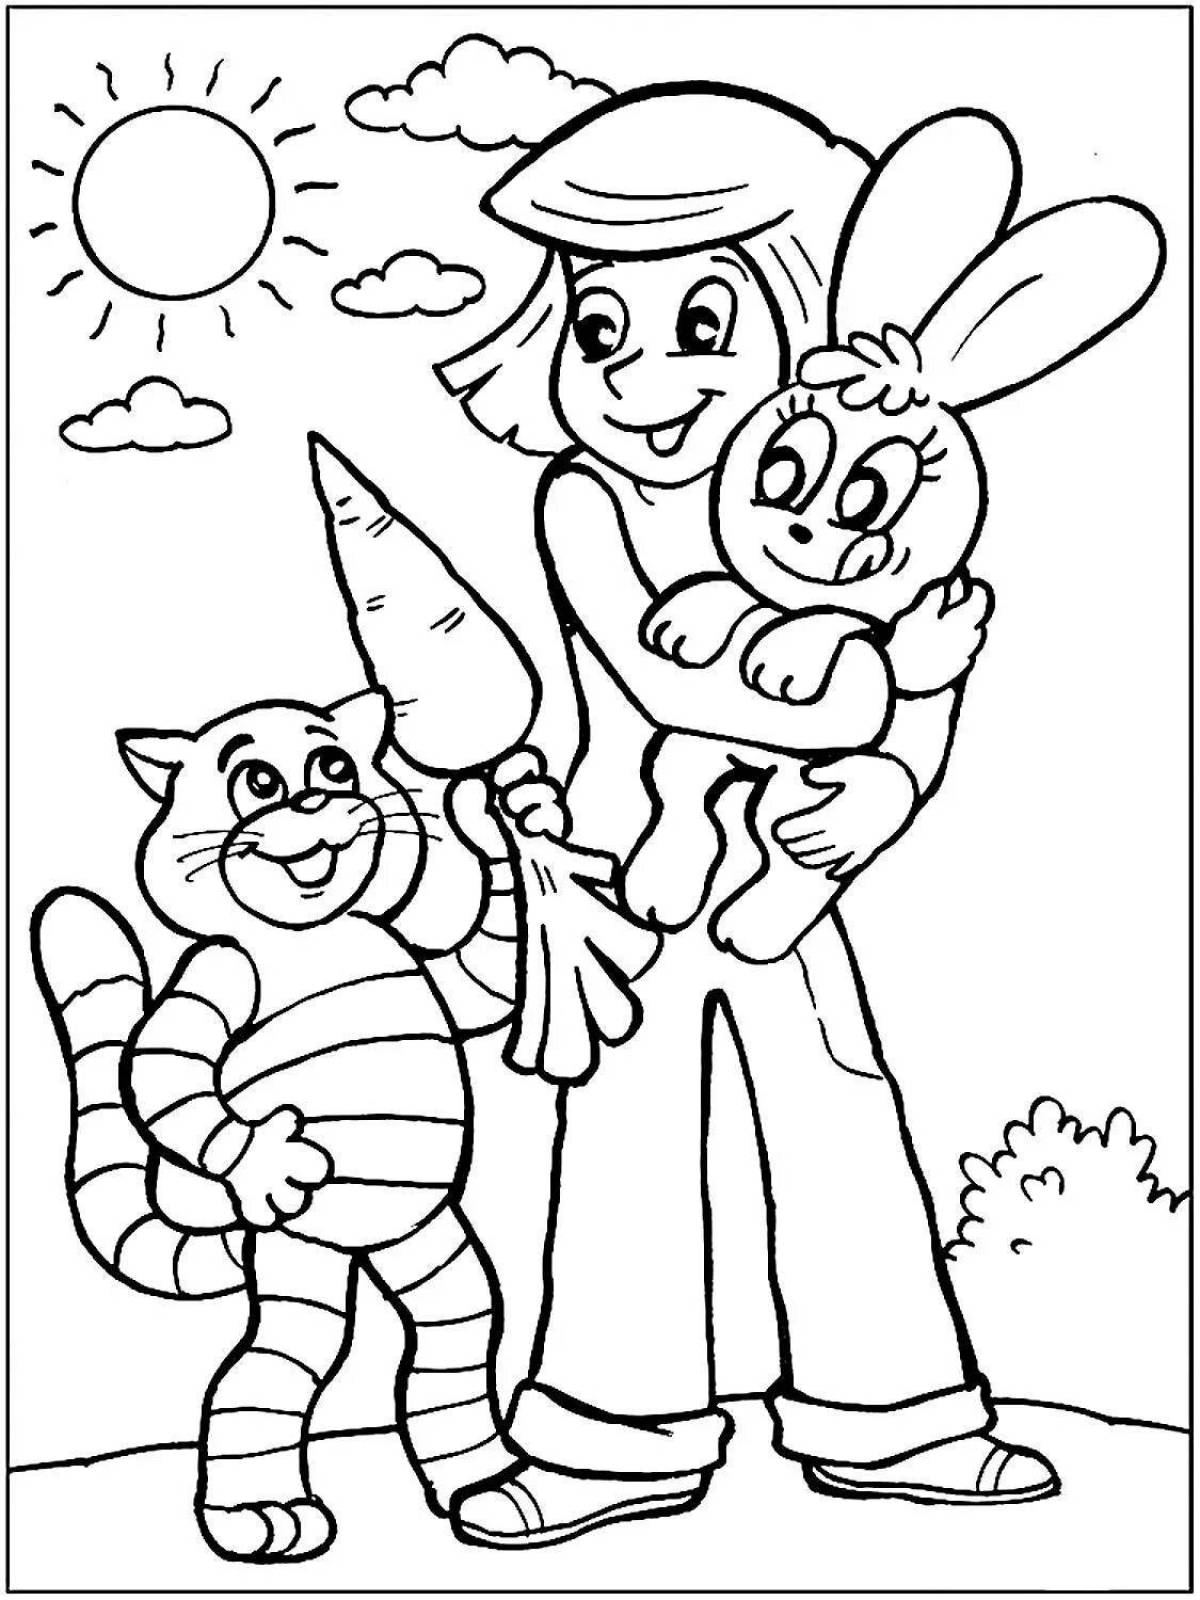 Fun Soviet coloring book for kids